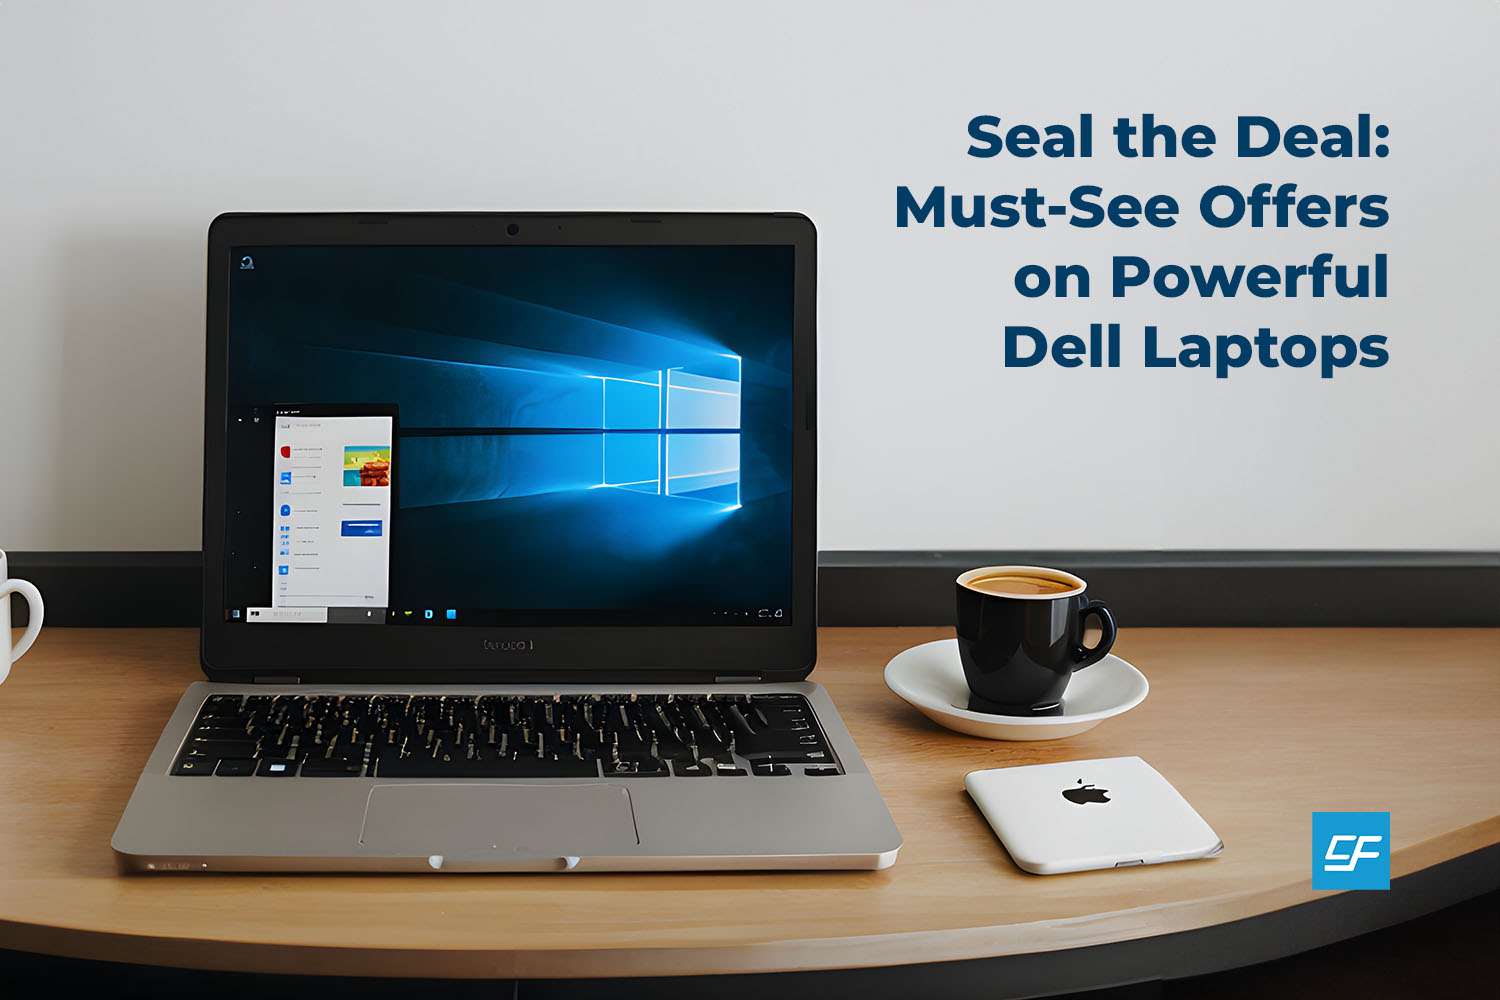 Seal the Deal: Must-See Offers on Powerful Dell Laptops